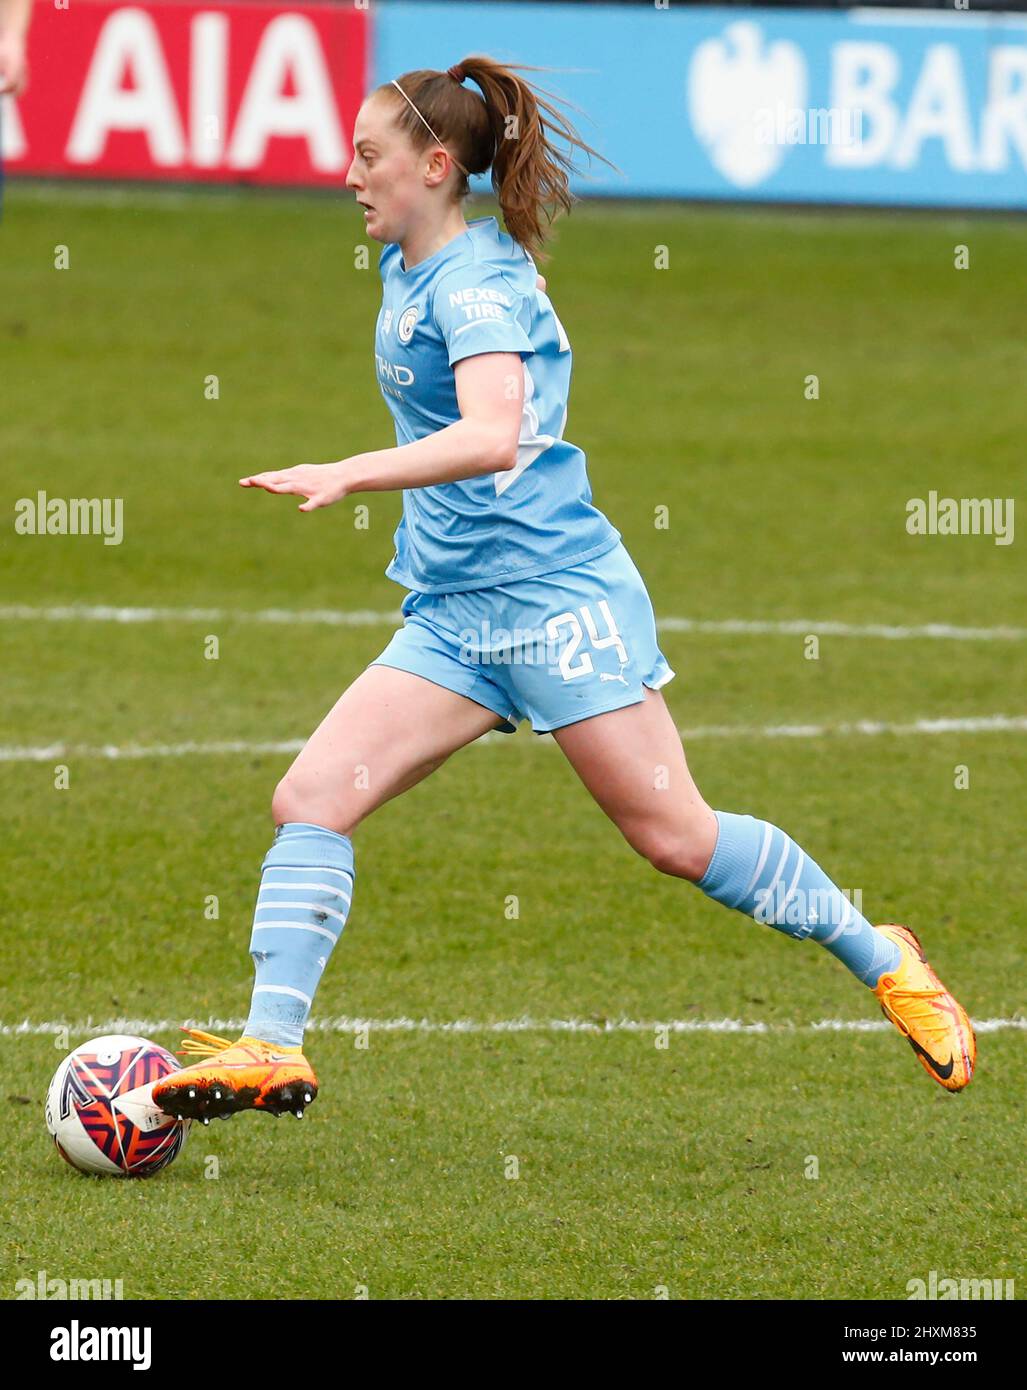 BARNET, ENGLAND - MARCH 13: Keira Walsh of Manchester City WFC  during  FA Women's Super League between Tottenham Hotspur Women and Manchester City Wo Stock Photo